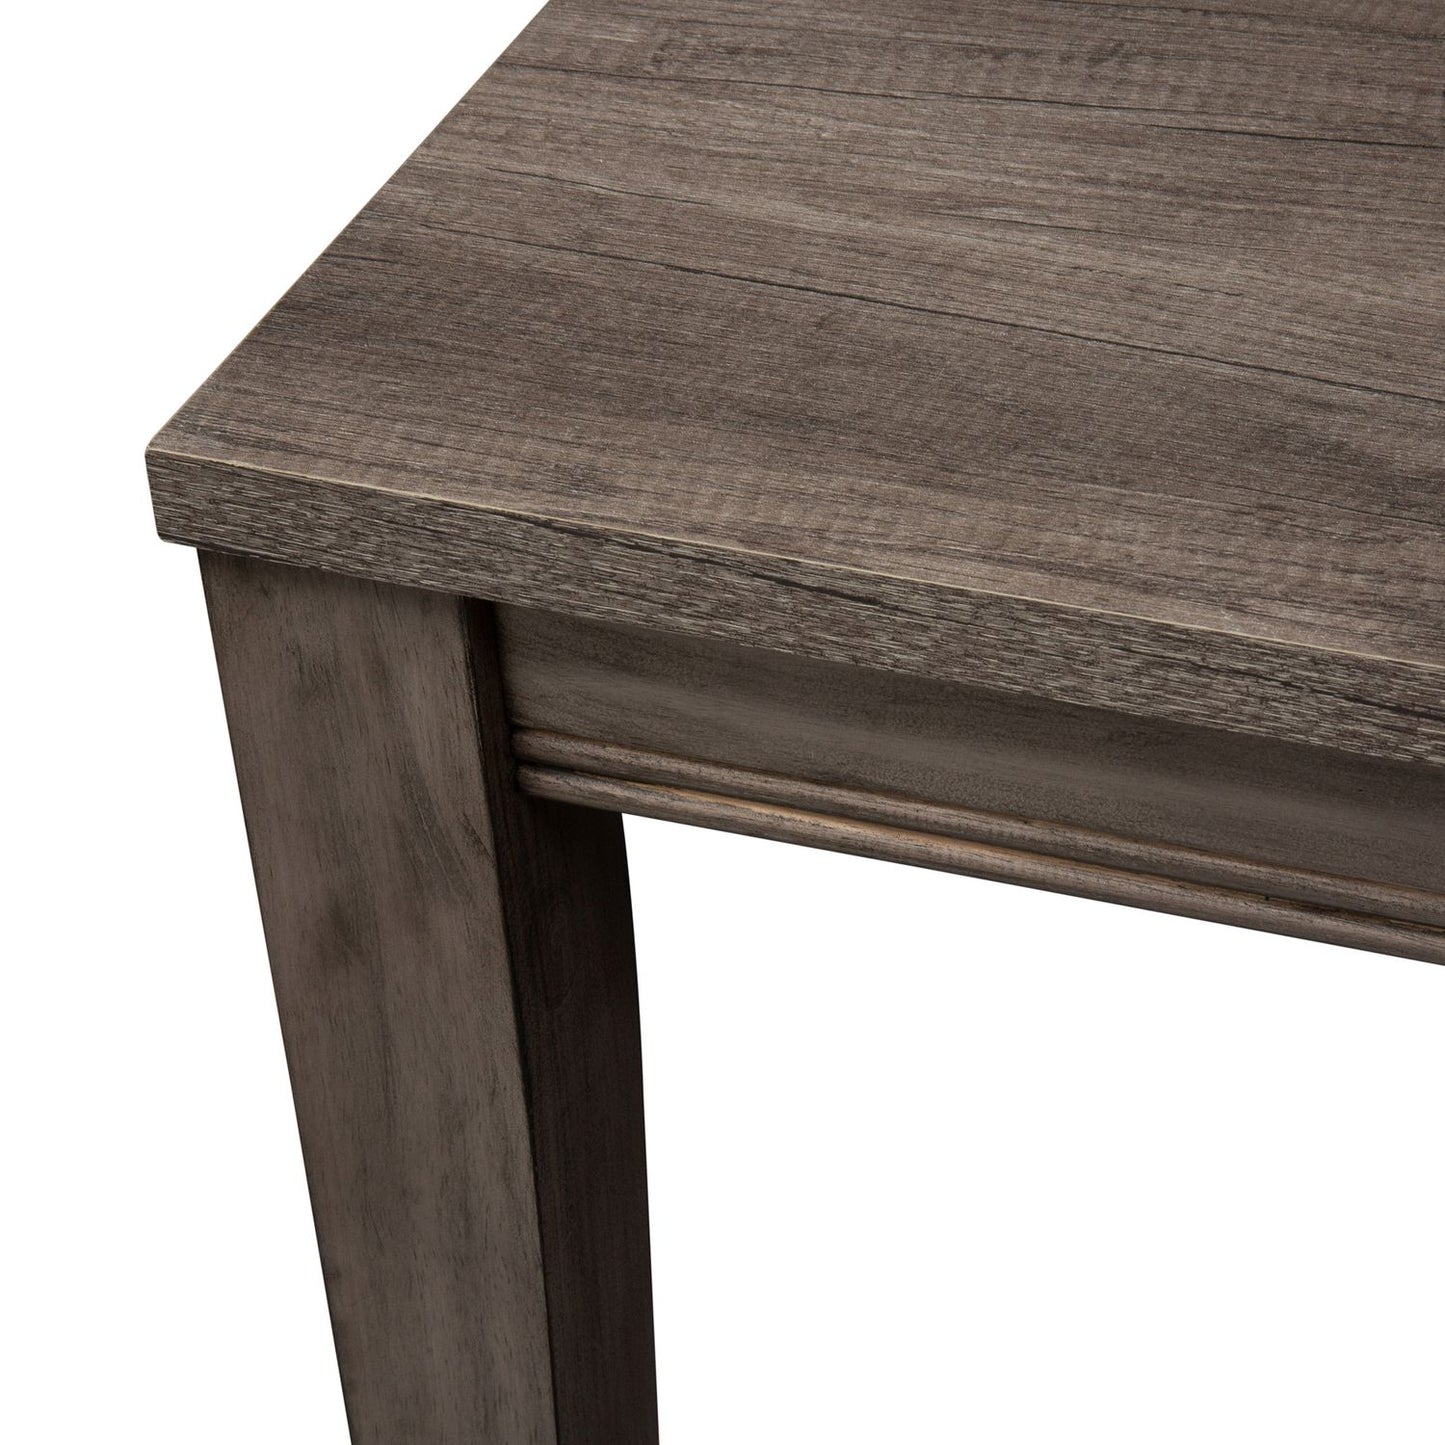 Tanners Creek Dining Table Greystone Finish